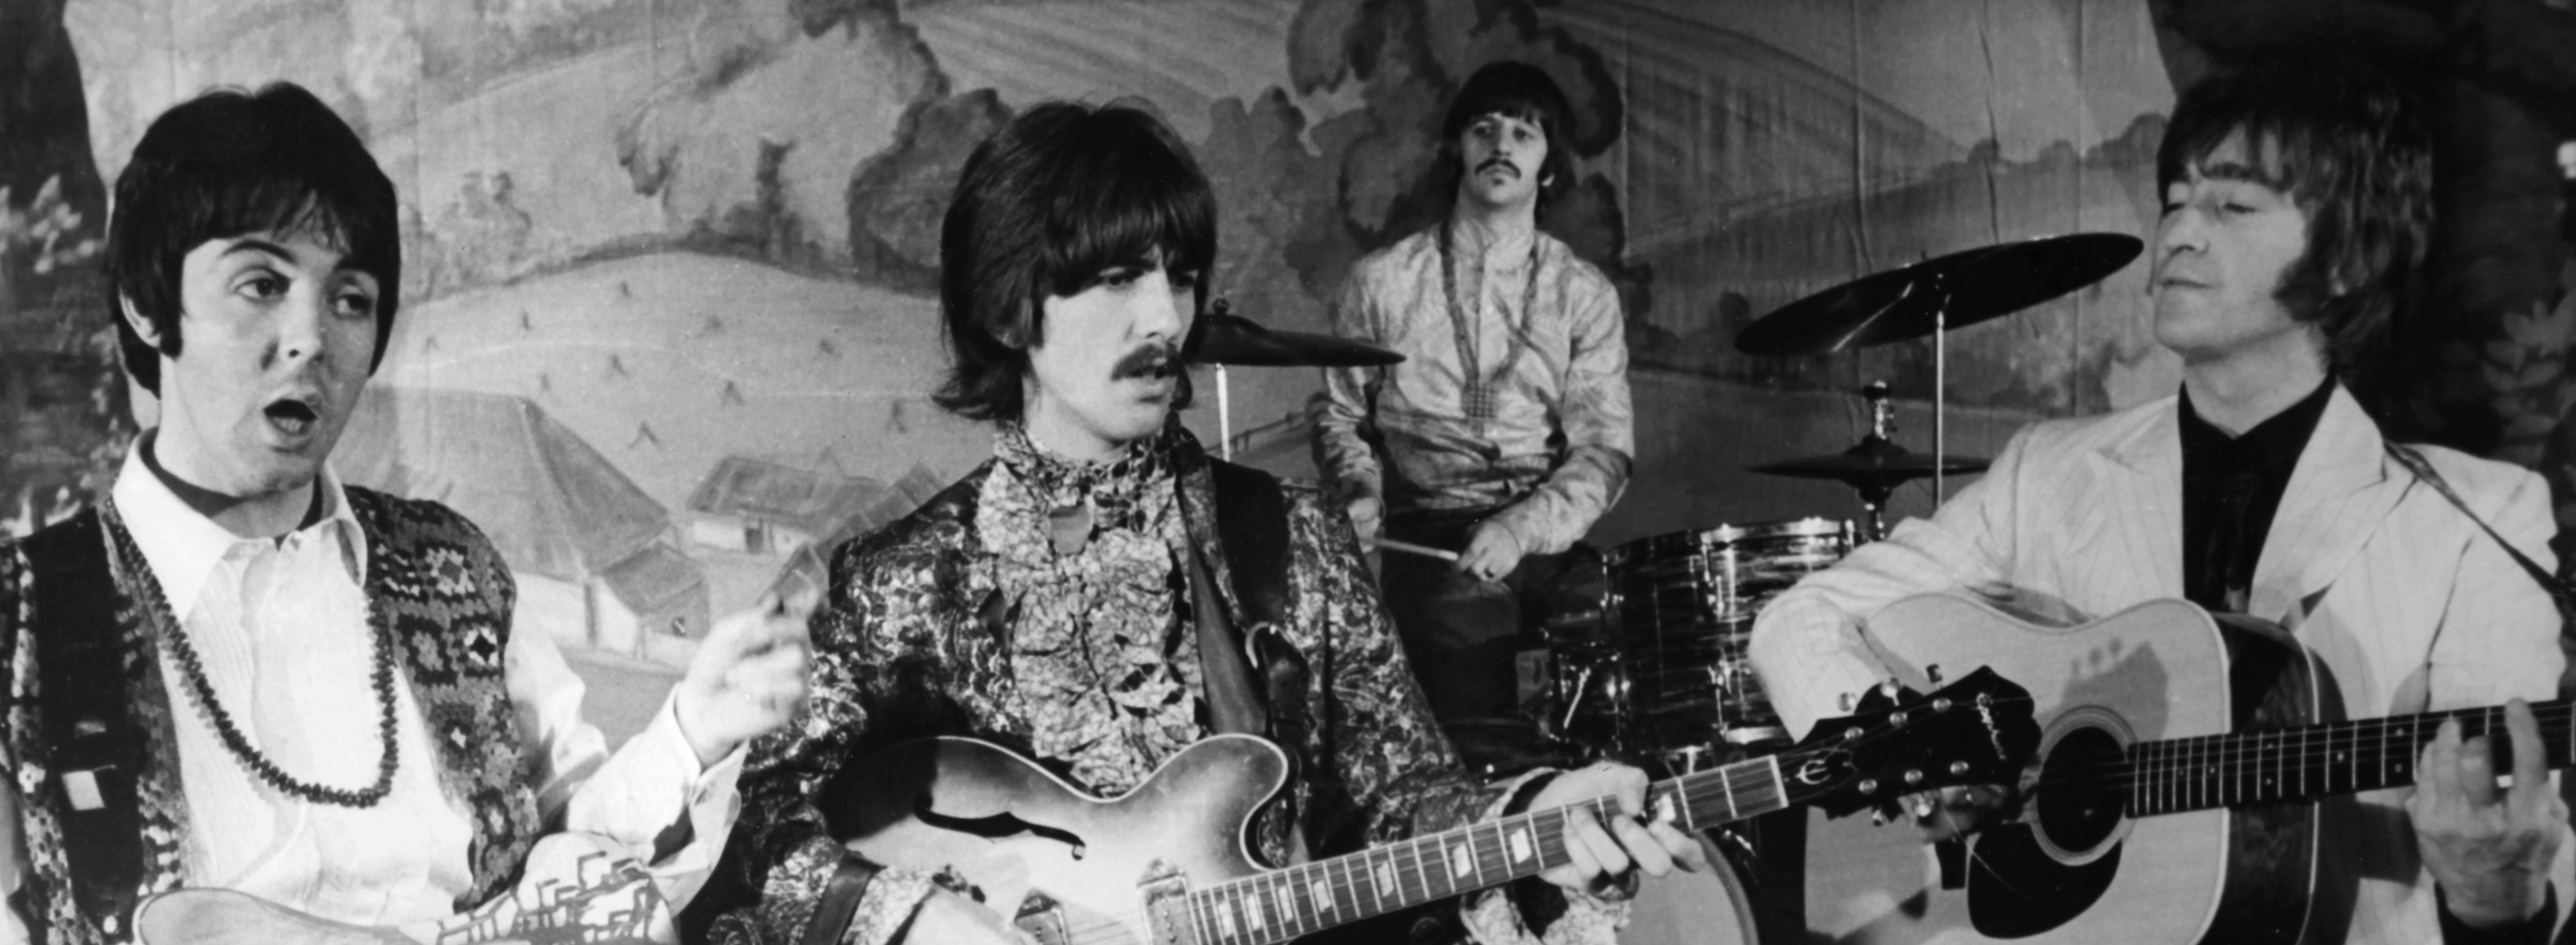 Stream The Beatles - Two Of Us (Fast Version) by BeatlesMaterial